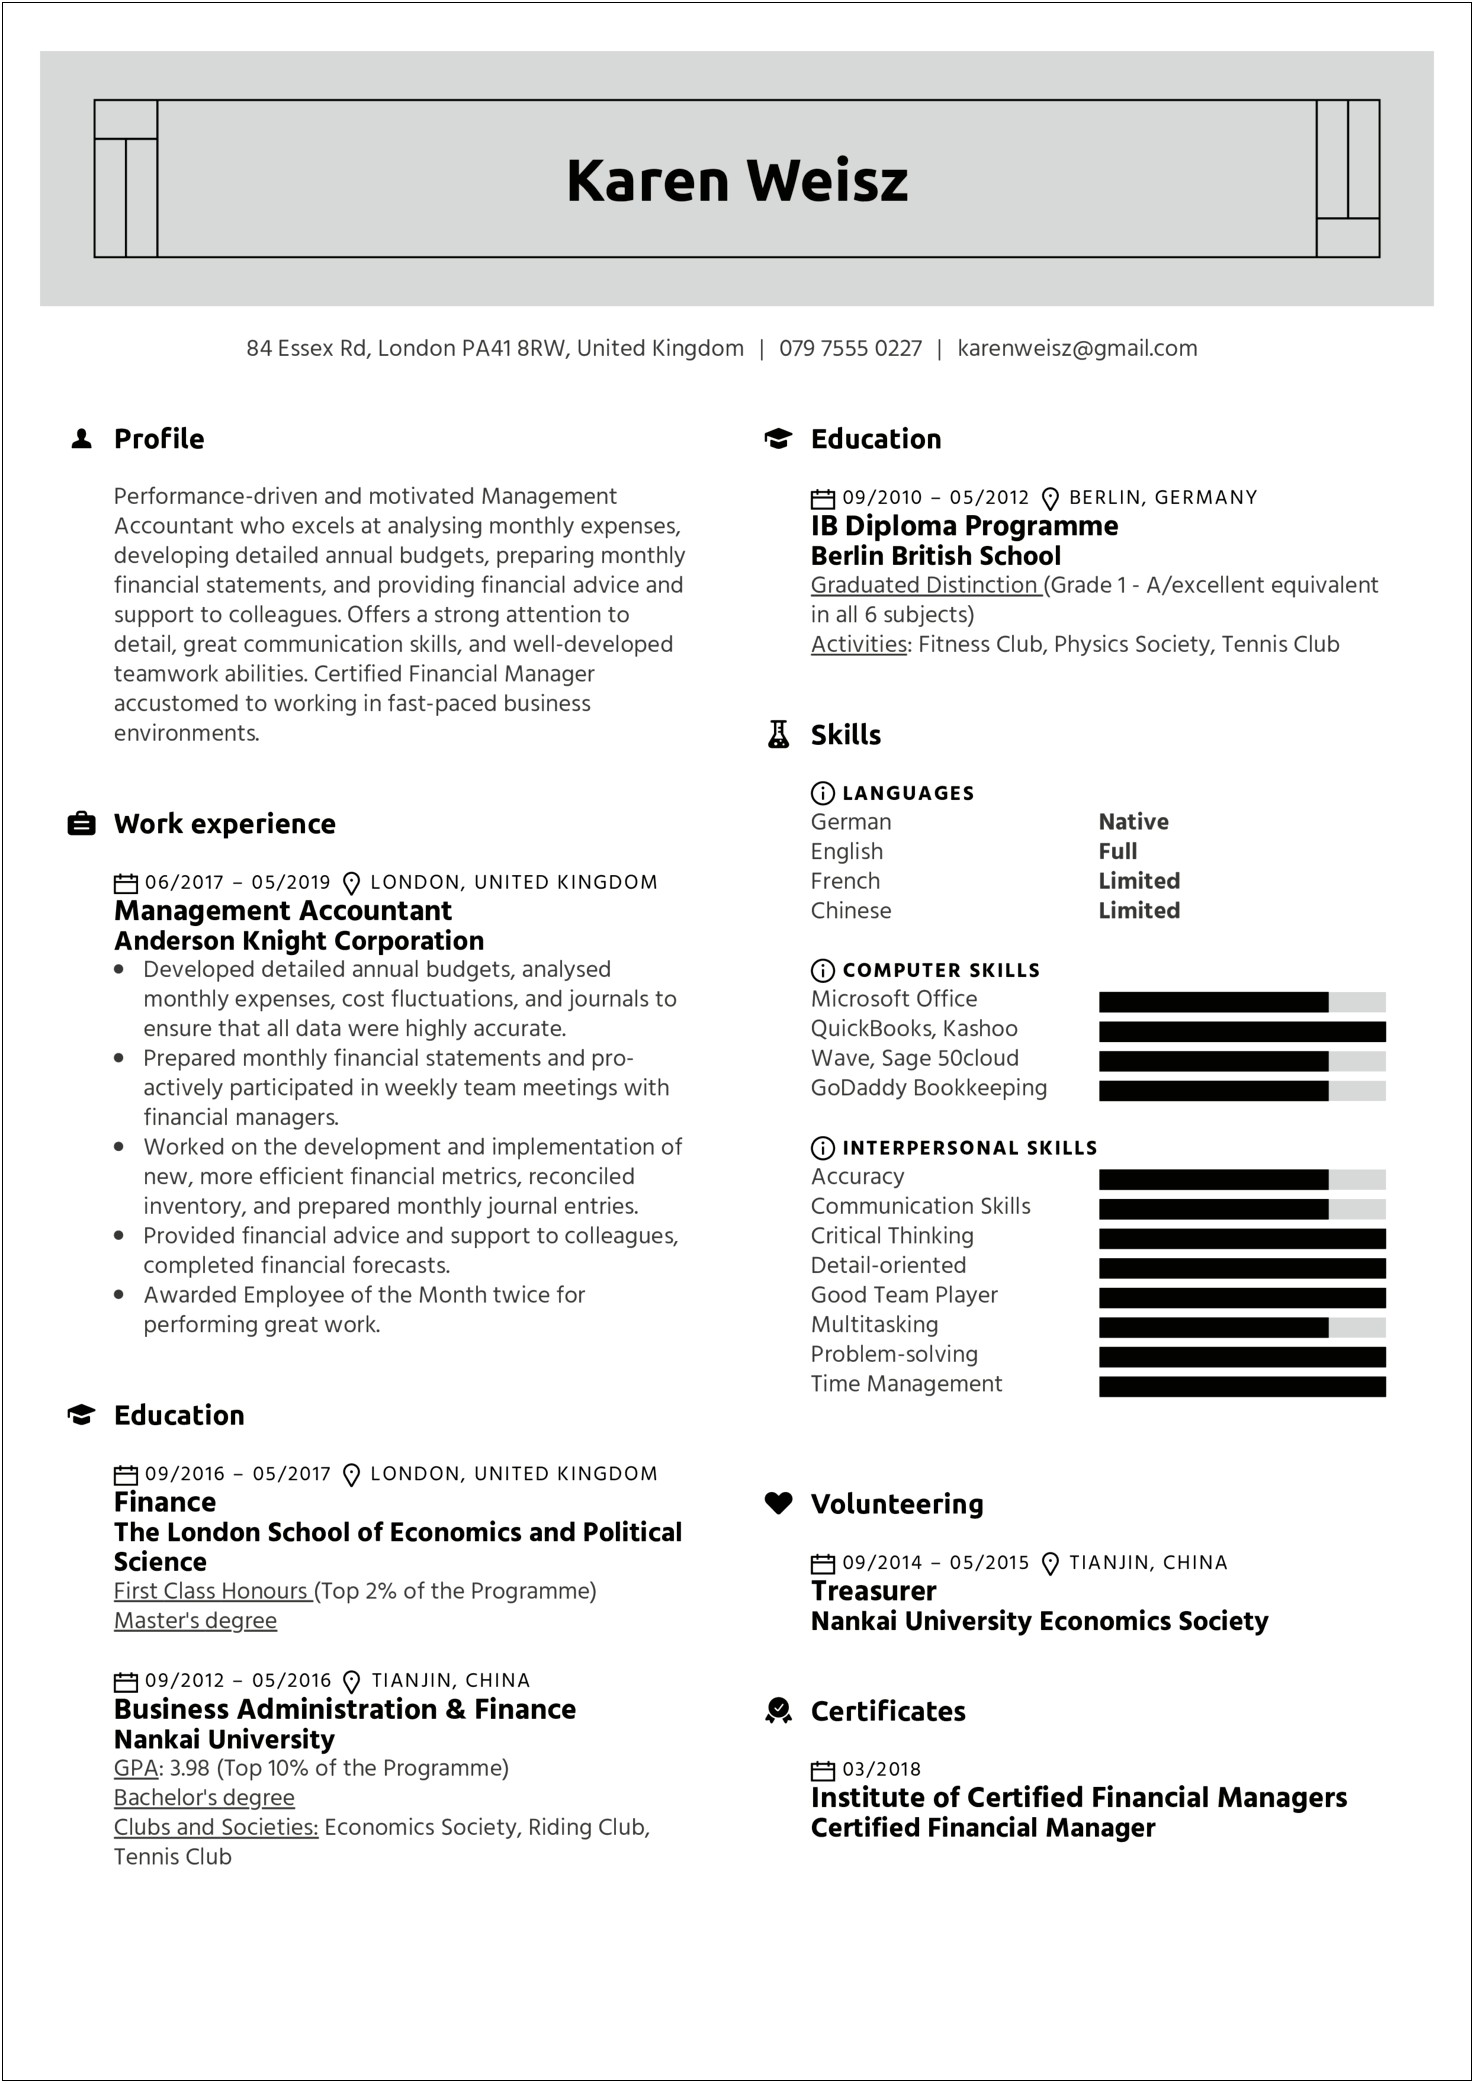 Management Skills And Abilities For Resumes